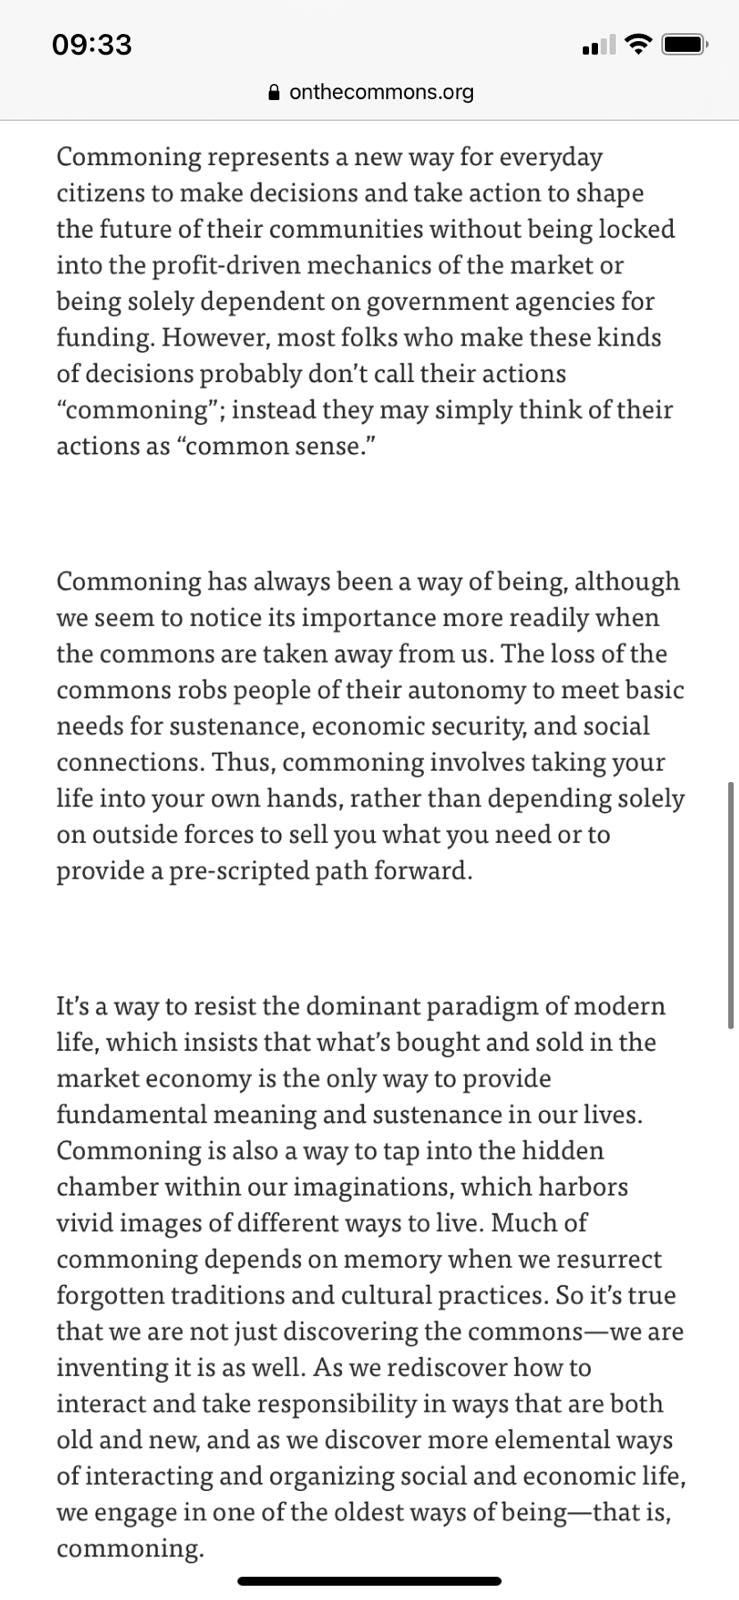 Definition of commoning. Link: https://www.onthecommons.org/work/what-commoning-anyway